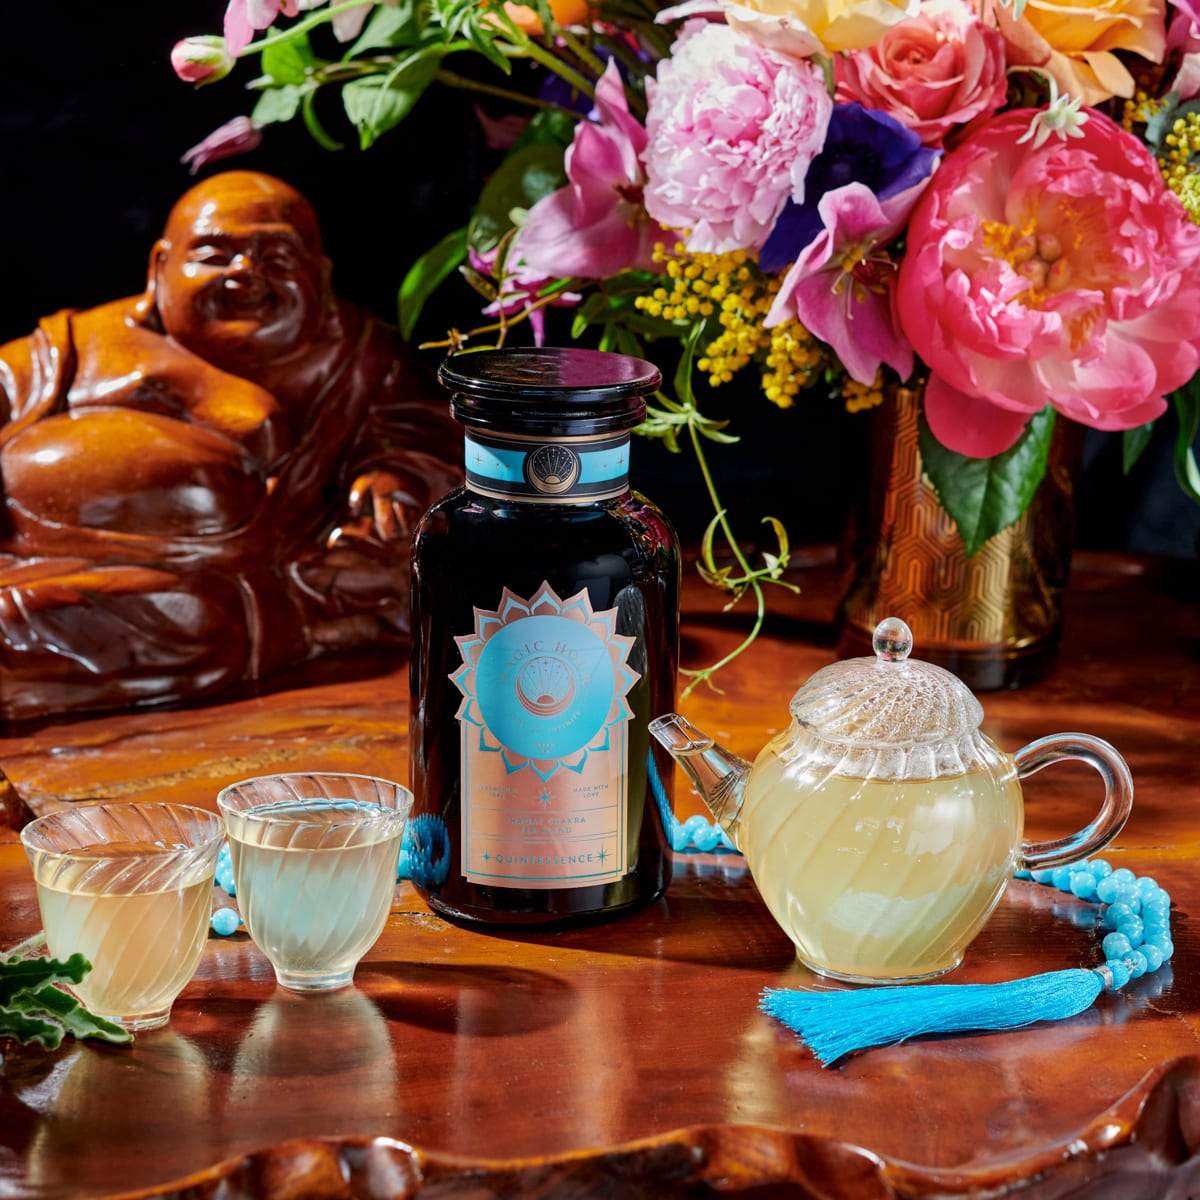 A dark bottle with an ornate label is placed on a wooden surface beside two glass cups, a clear teapot filled with light yellow organic tea, a strand of blue beads, and a colorful bouquet of flowers. A statue is visible in the background. The label reads "Quintessence™ Tea for Opening & Healing the Throat Chakra" by Magic Hour.